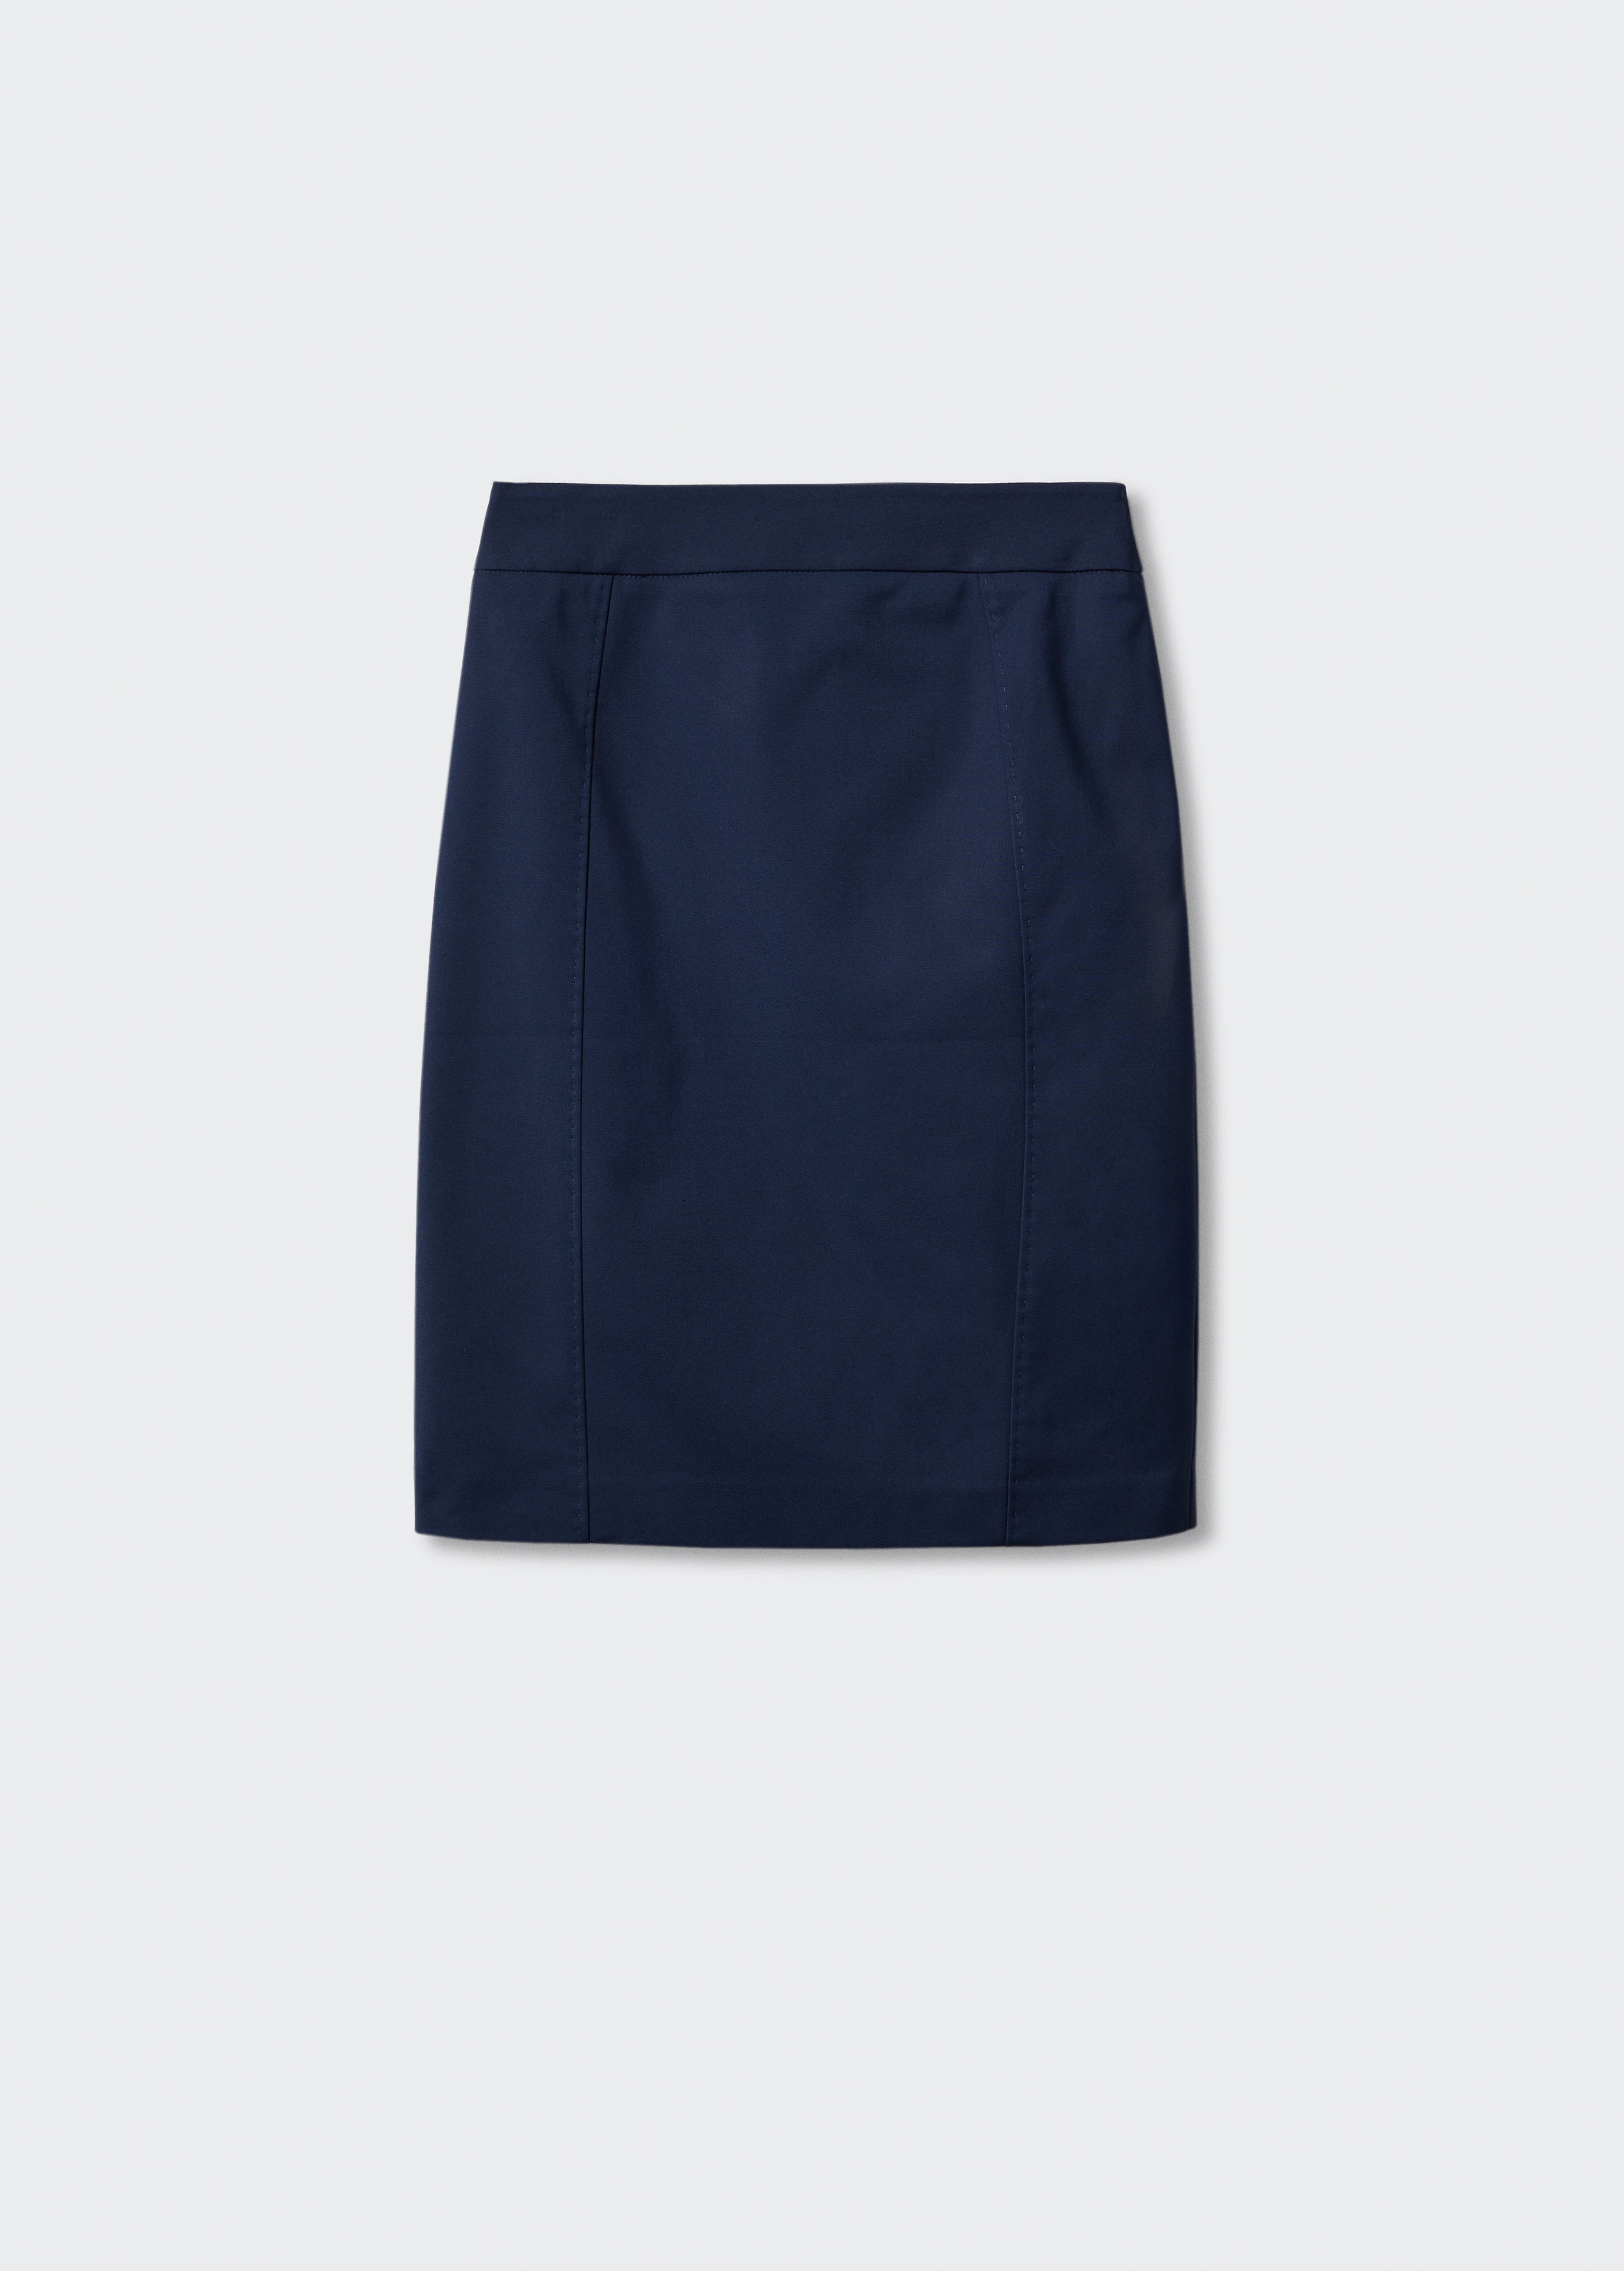 Suit pencil skirt - Article without model